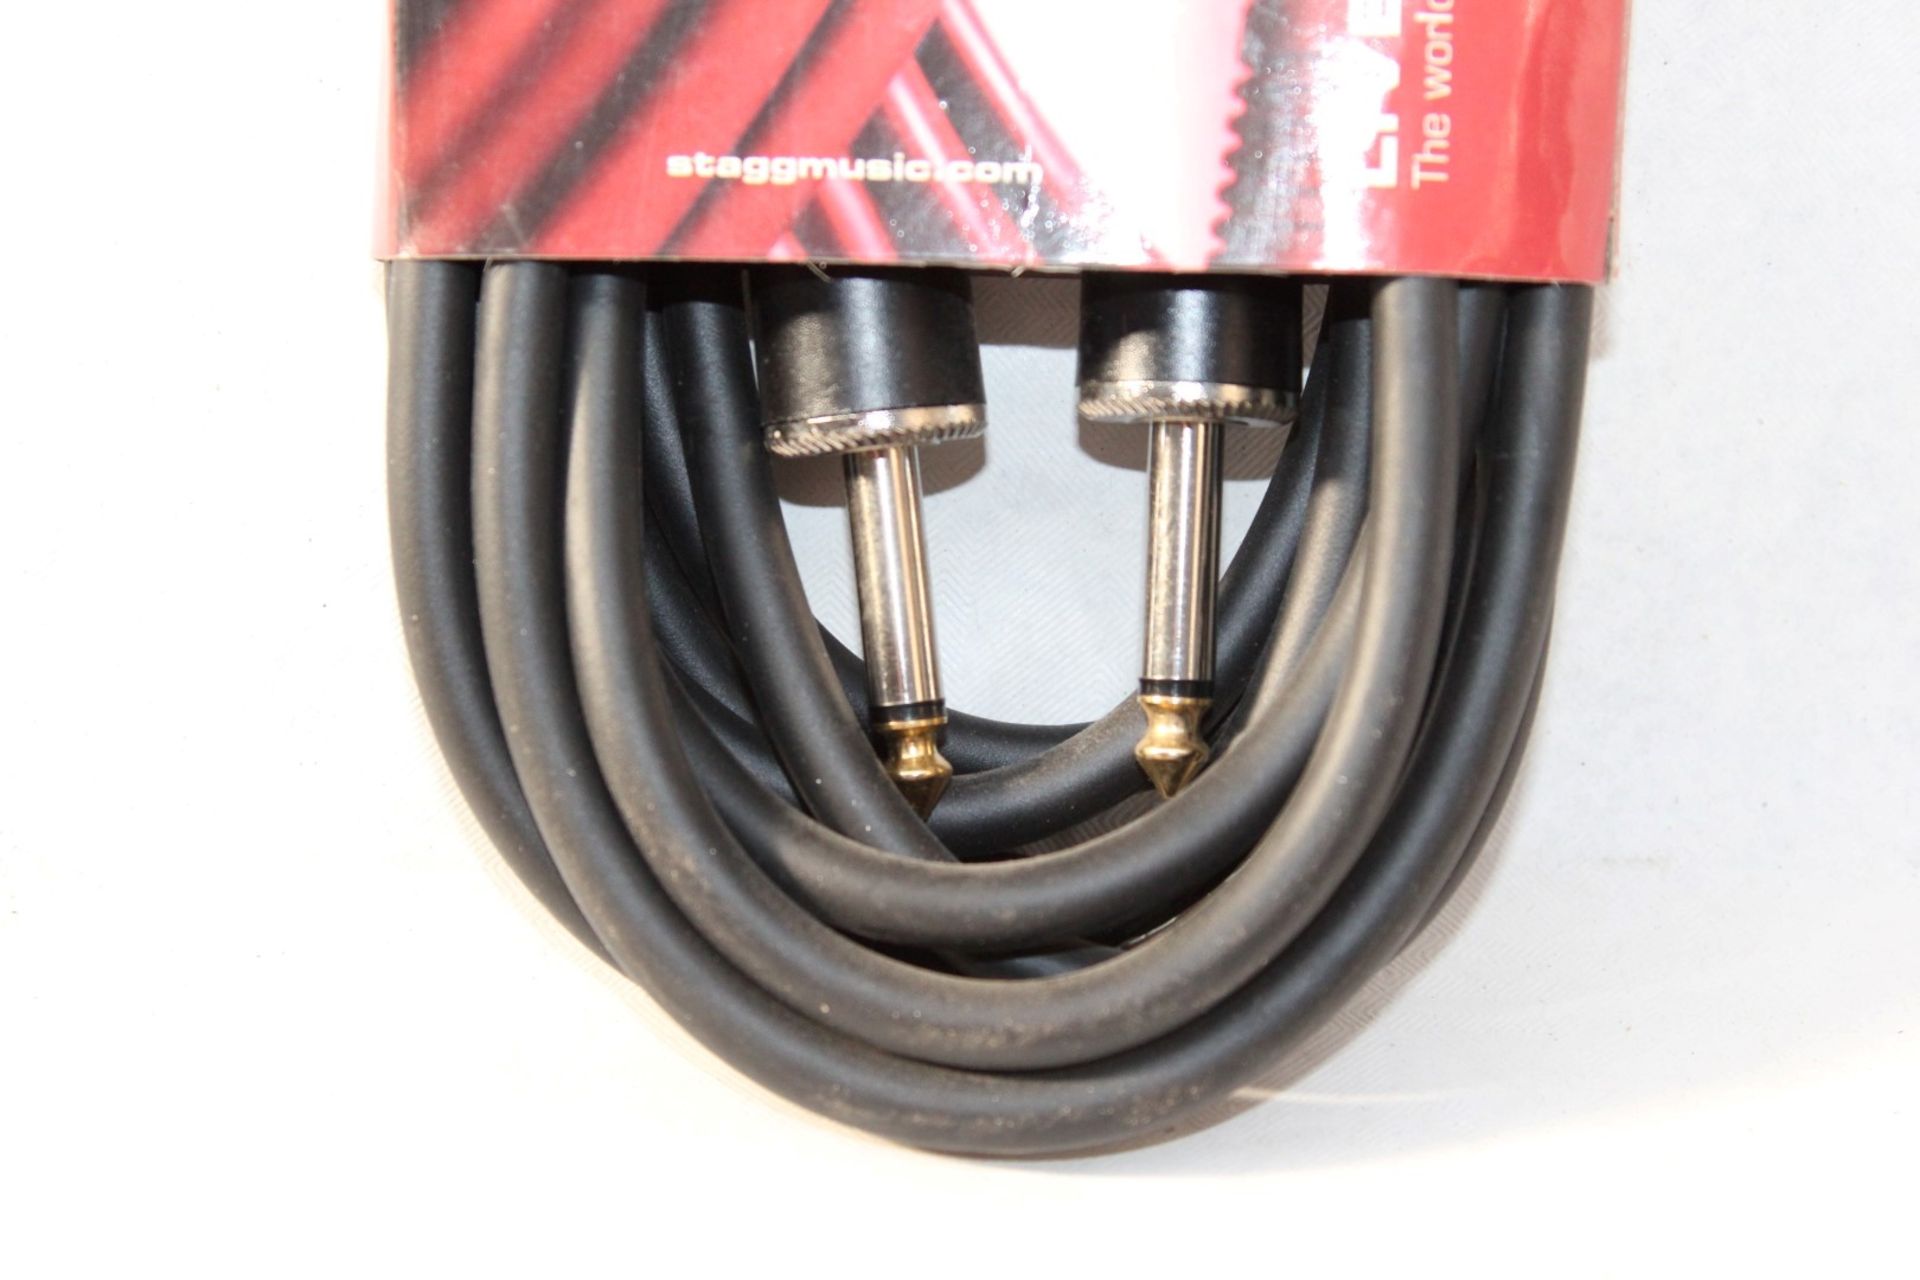 2 x Stagg Jack to Jack Cables Suitable For Guitats, Speakers or Keyboards - Product Code HPC-6/1.5 - Image 4 of 4